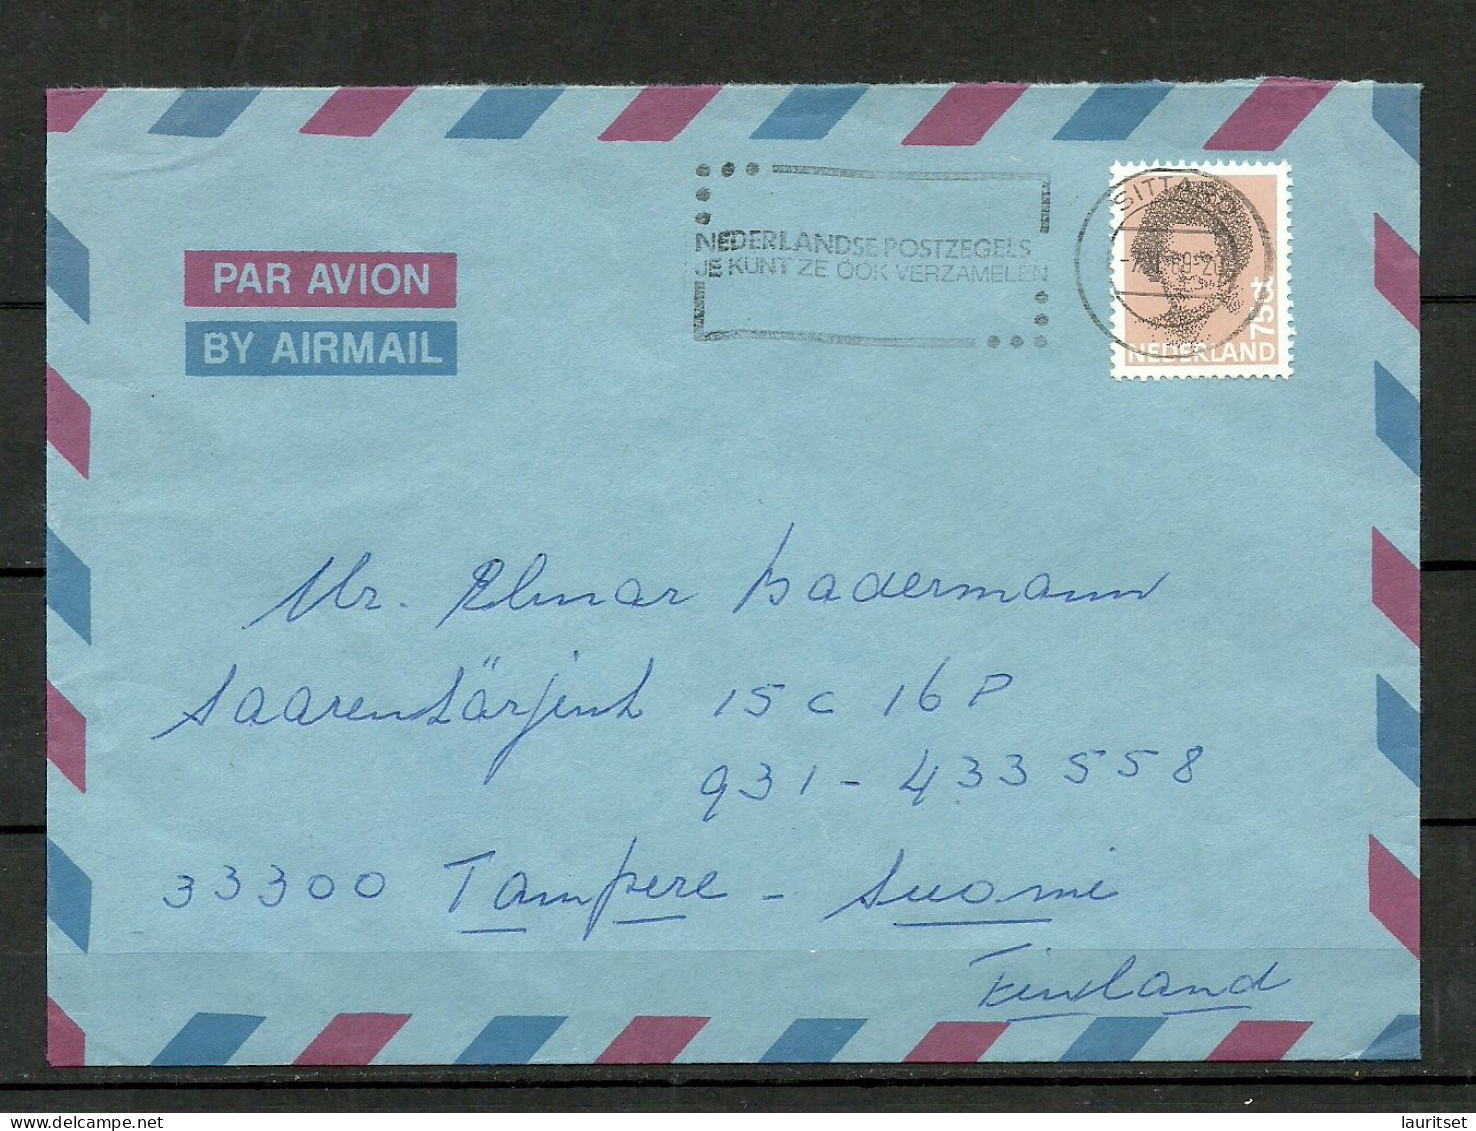 NEDERLAND 1989 O SITTARD Air Mail Cover To Finland Advertising Propaganda Cachet - Covers & Documents